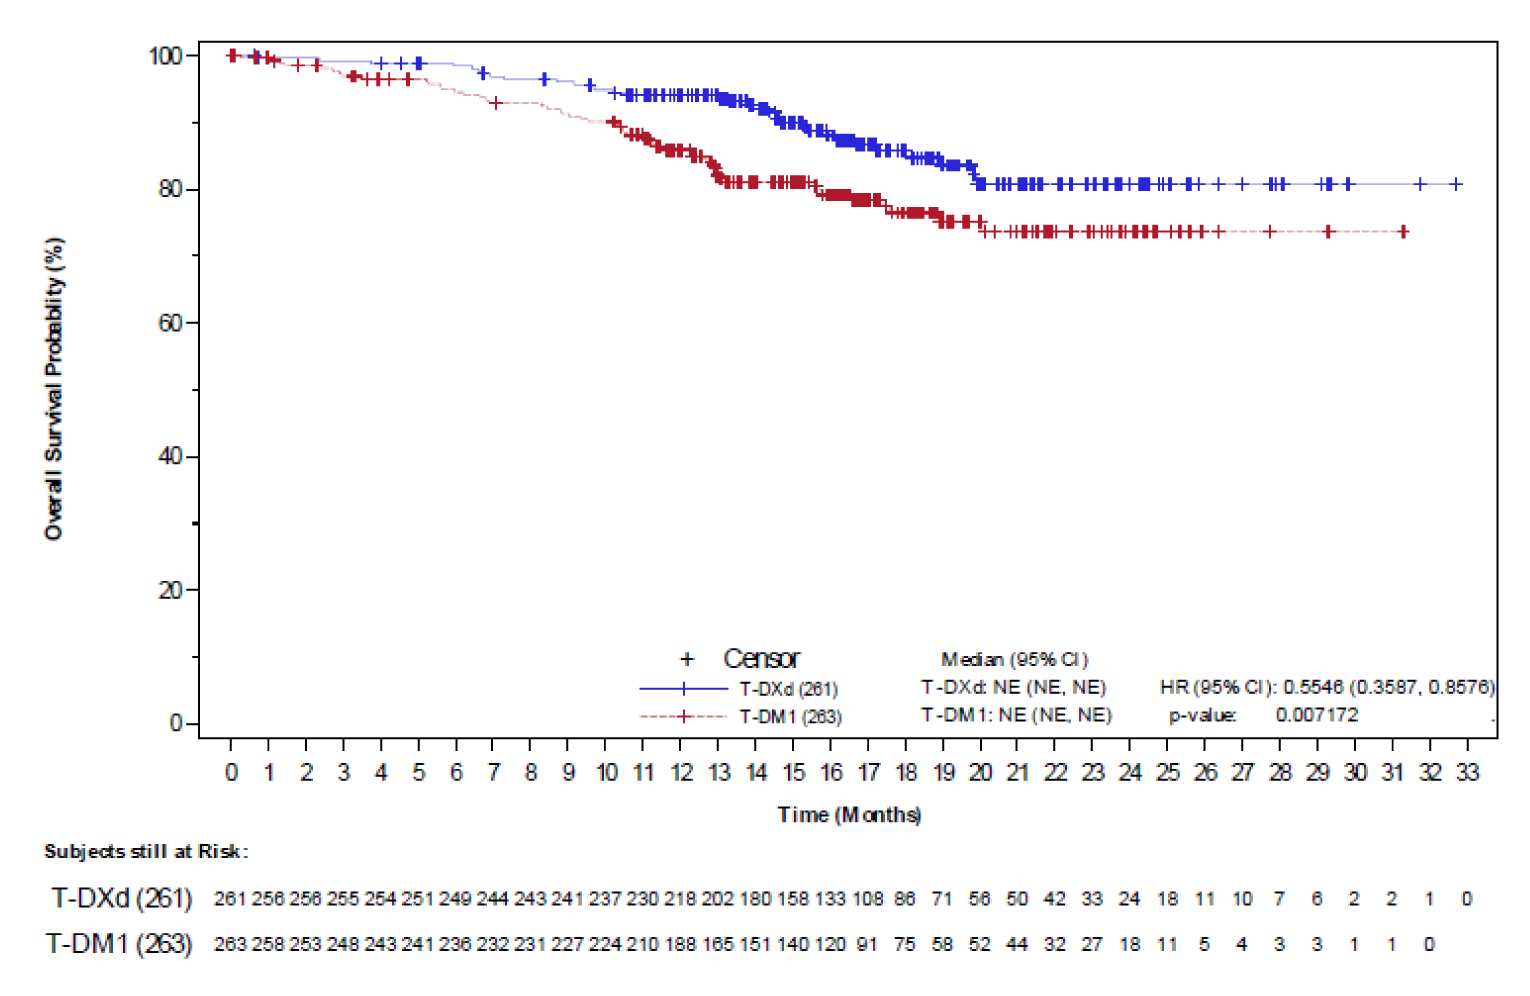 In this Kaplan-Meier analysis of OS among patients in the DESTINY-Breast03 study, approximately 5% of patients receiving trastuzumab emtansine had died by 6 months, approximately 15% had died by 12 months, and approximately 25% had died by 24 months. In contrast, approximately 2% of patients receiving T-DXd had died by 6 months, approximately 5% had died by 12 months, and approximately 20% had died by 24 months. Median (95% CI) OS was not estimable in either treatment arm; the HR comparing T-DXd to trastuzumab emtansine was 0.5546 (95% CI, 0.3587 to 0.8576) (P = 0.007172). The number of at-risk patients receiving T-DXd at 0, 1, 2, 3, 4, 5, 6, 7, 8, 9, 10, 11, 12, 13, 14, 15, 16, 17, 18, 19, 20, 21, 22, 23, 24, 25, 26, 27, 28, 29 30, 31, 32, and 33 months was 261, 256, 256, 255, 254, 251, 249, 244, 243, 241, 237, 230, 218, 202, 180, 158, 133, 108, 86, 71, 56, 50, 42, 33, 24, 18, 11, 10, 7, 6, 2, 2, 1, and 0, respectively. The number of at-risk patients receiving trastuzumab emtansine at 0, 1, 2, 3, 4, 5, 6, 7, 8, 9, 10, 11, 12, 13, 14, 15, 16, 17, 18, 19, 20, 21, 22, 23, 24, 25, 26, 27, 28, 29 30, 31, and 32 months was 263, 258, 253, 248, 243, 241, 236, 232, 231, 227, 224, 210, 188, 165, 151, 140, 120, 91, 75, 58, 52, 44, 32, 27, 18, 11, 5, 4, 3, 3, 1, 1, and 0, respectively.